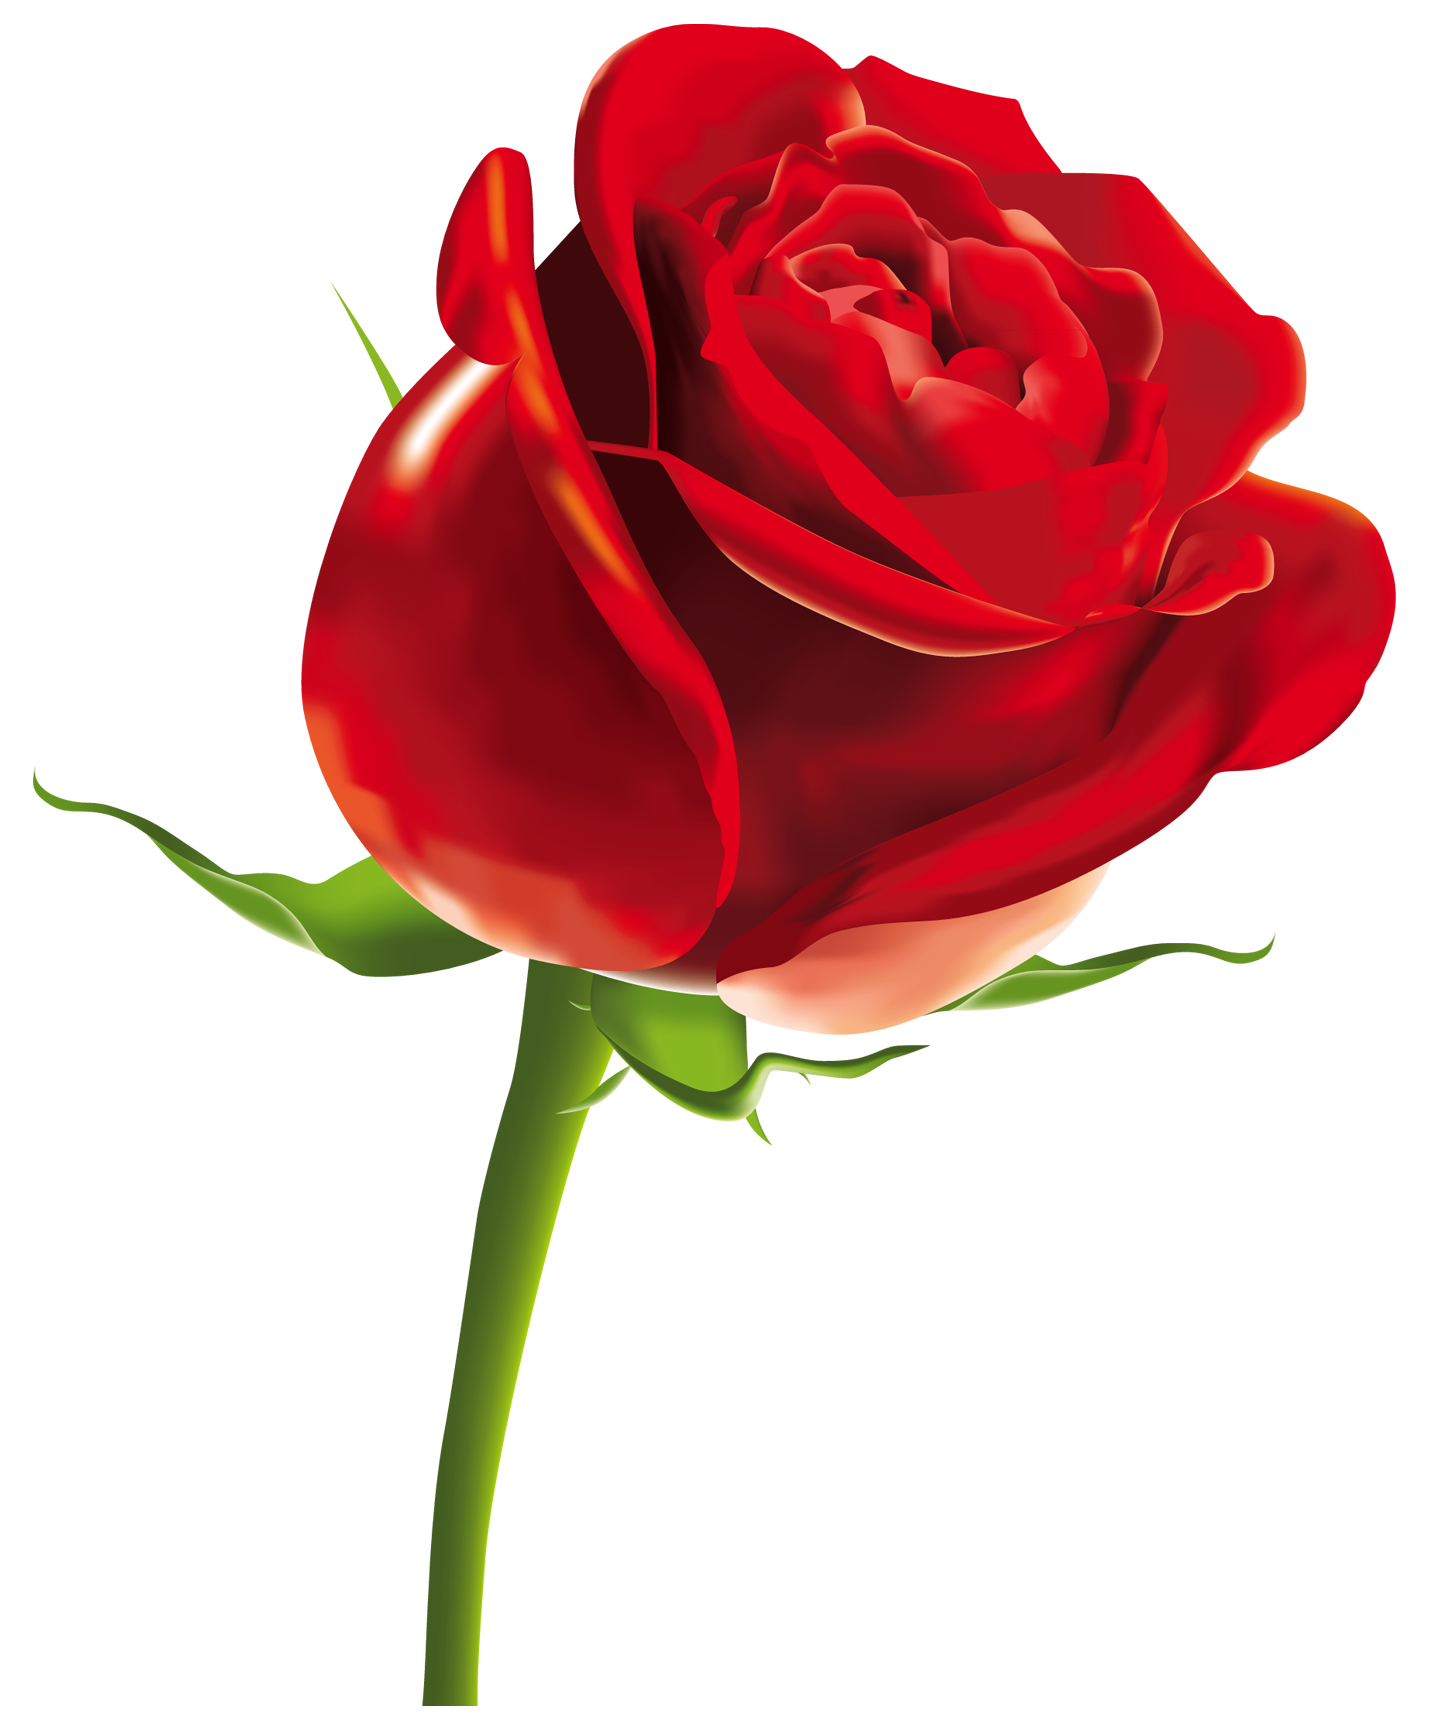 roses clipart images - photo #41